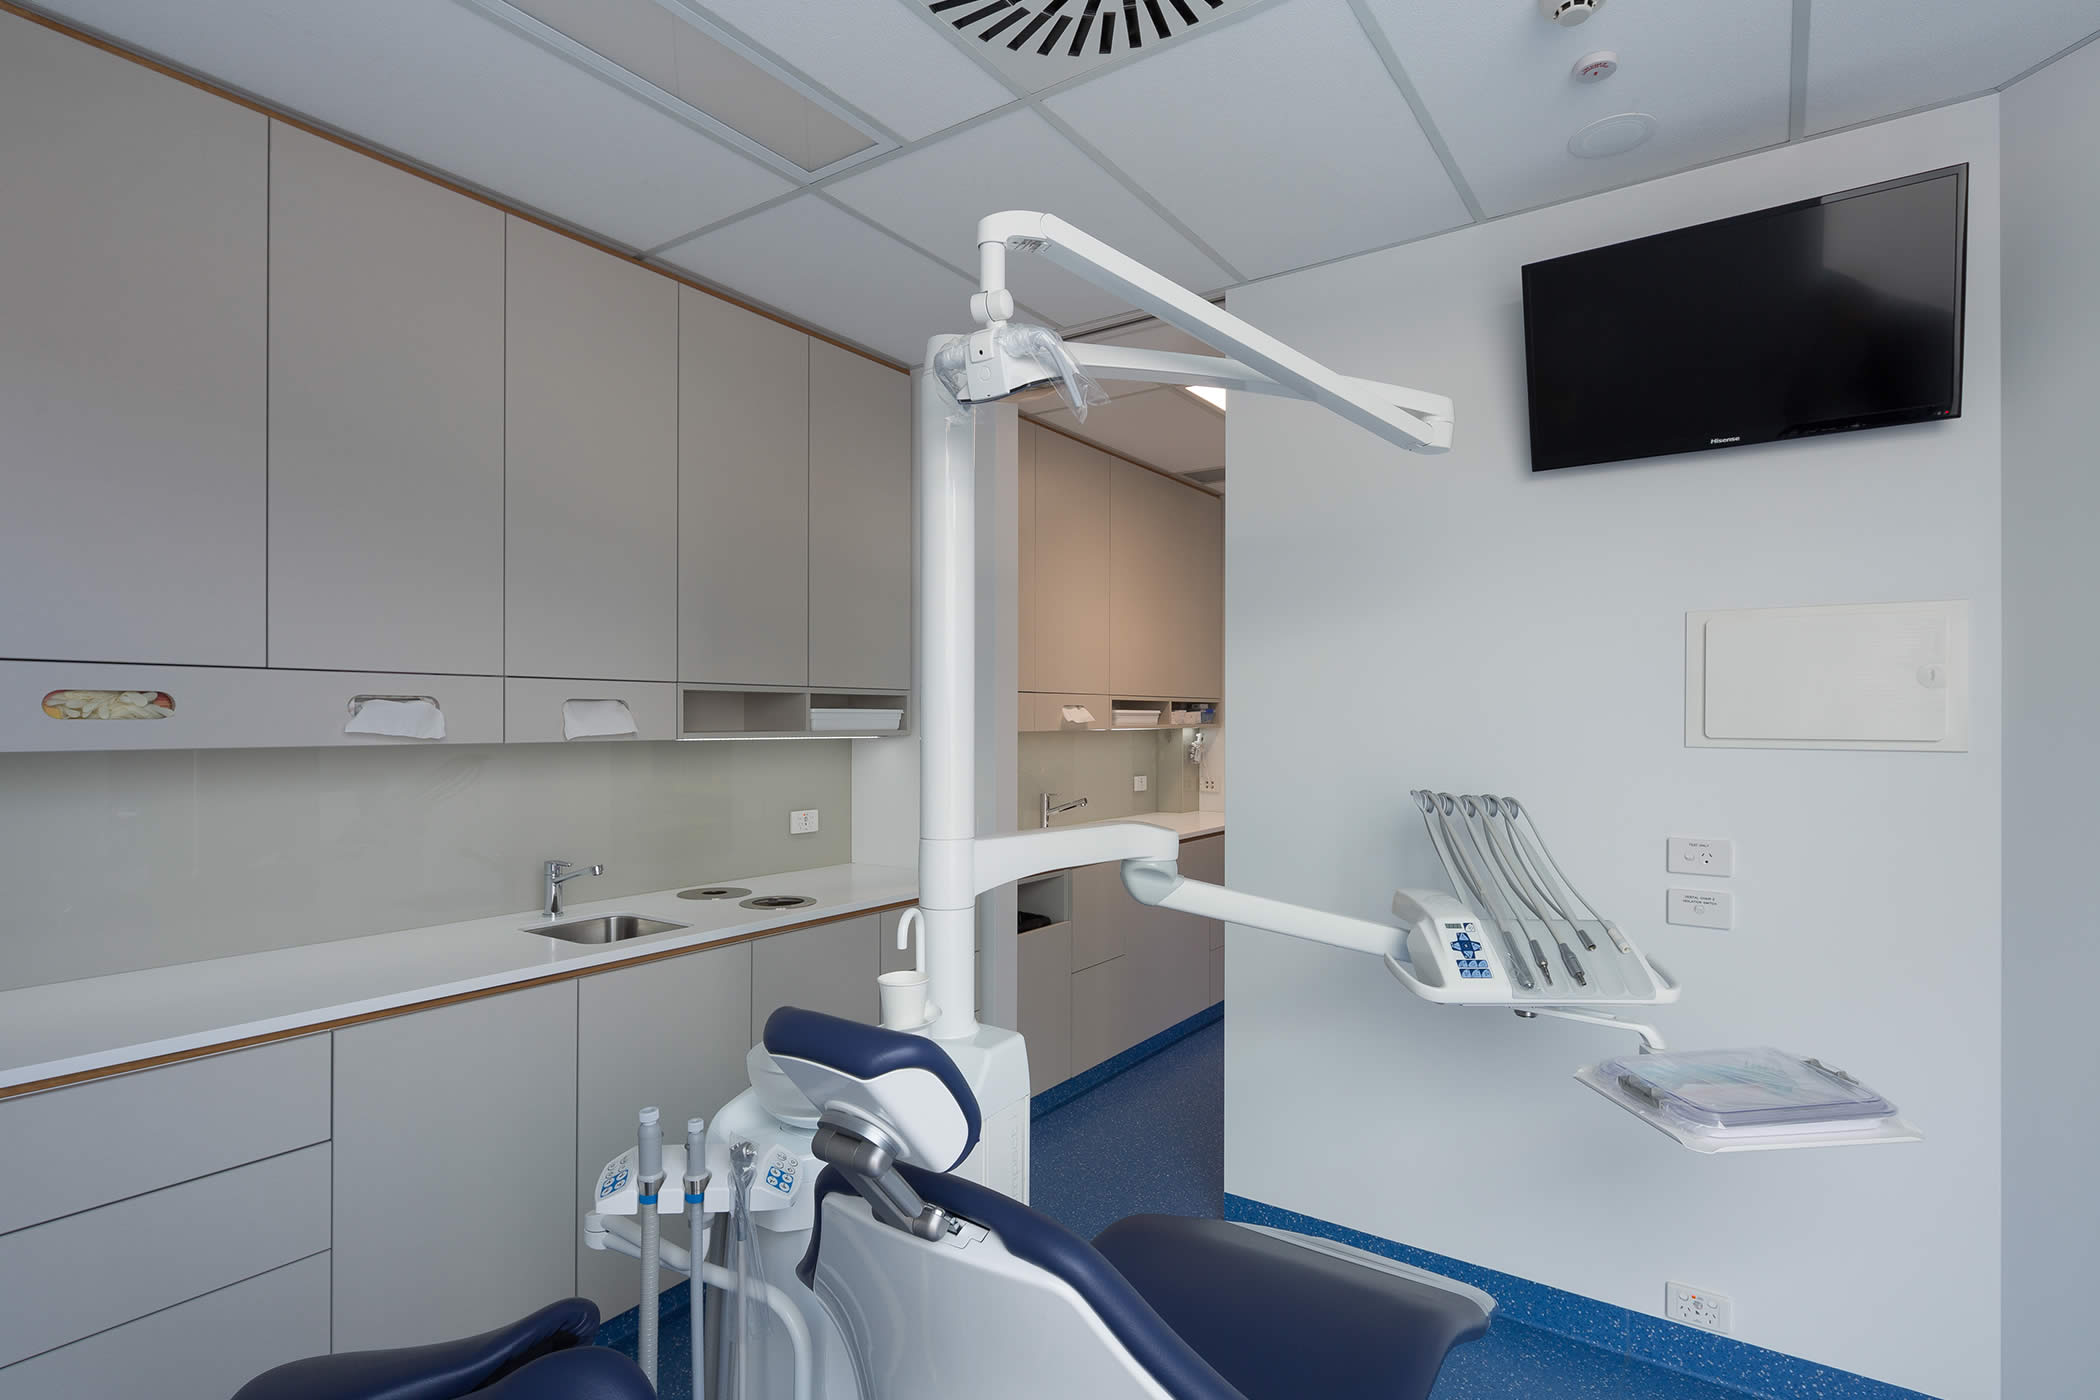 The Dental Pod interior fit-out, Hobart, Tasmania: Our careful design balances spatial needs with rigorous technical and environmental demands to achieve ease of use and quality of service delivery by our client. Photo by Thomas Ryan.